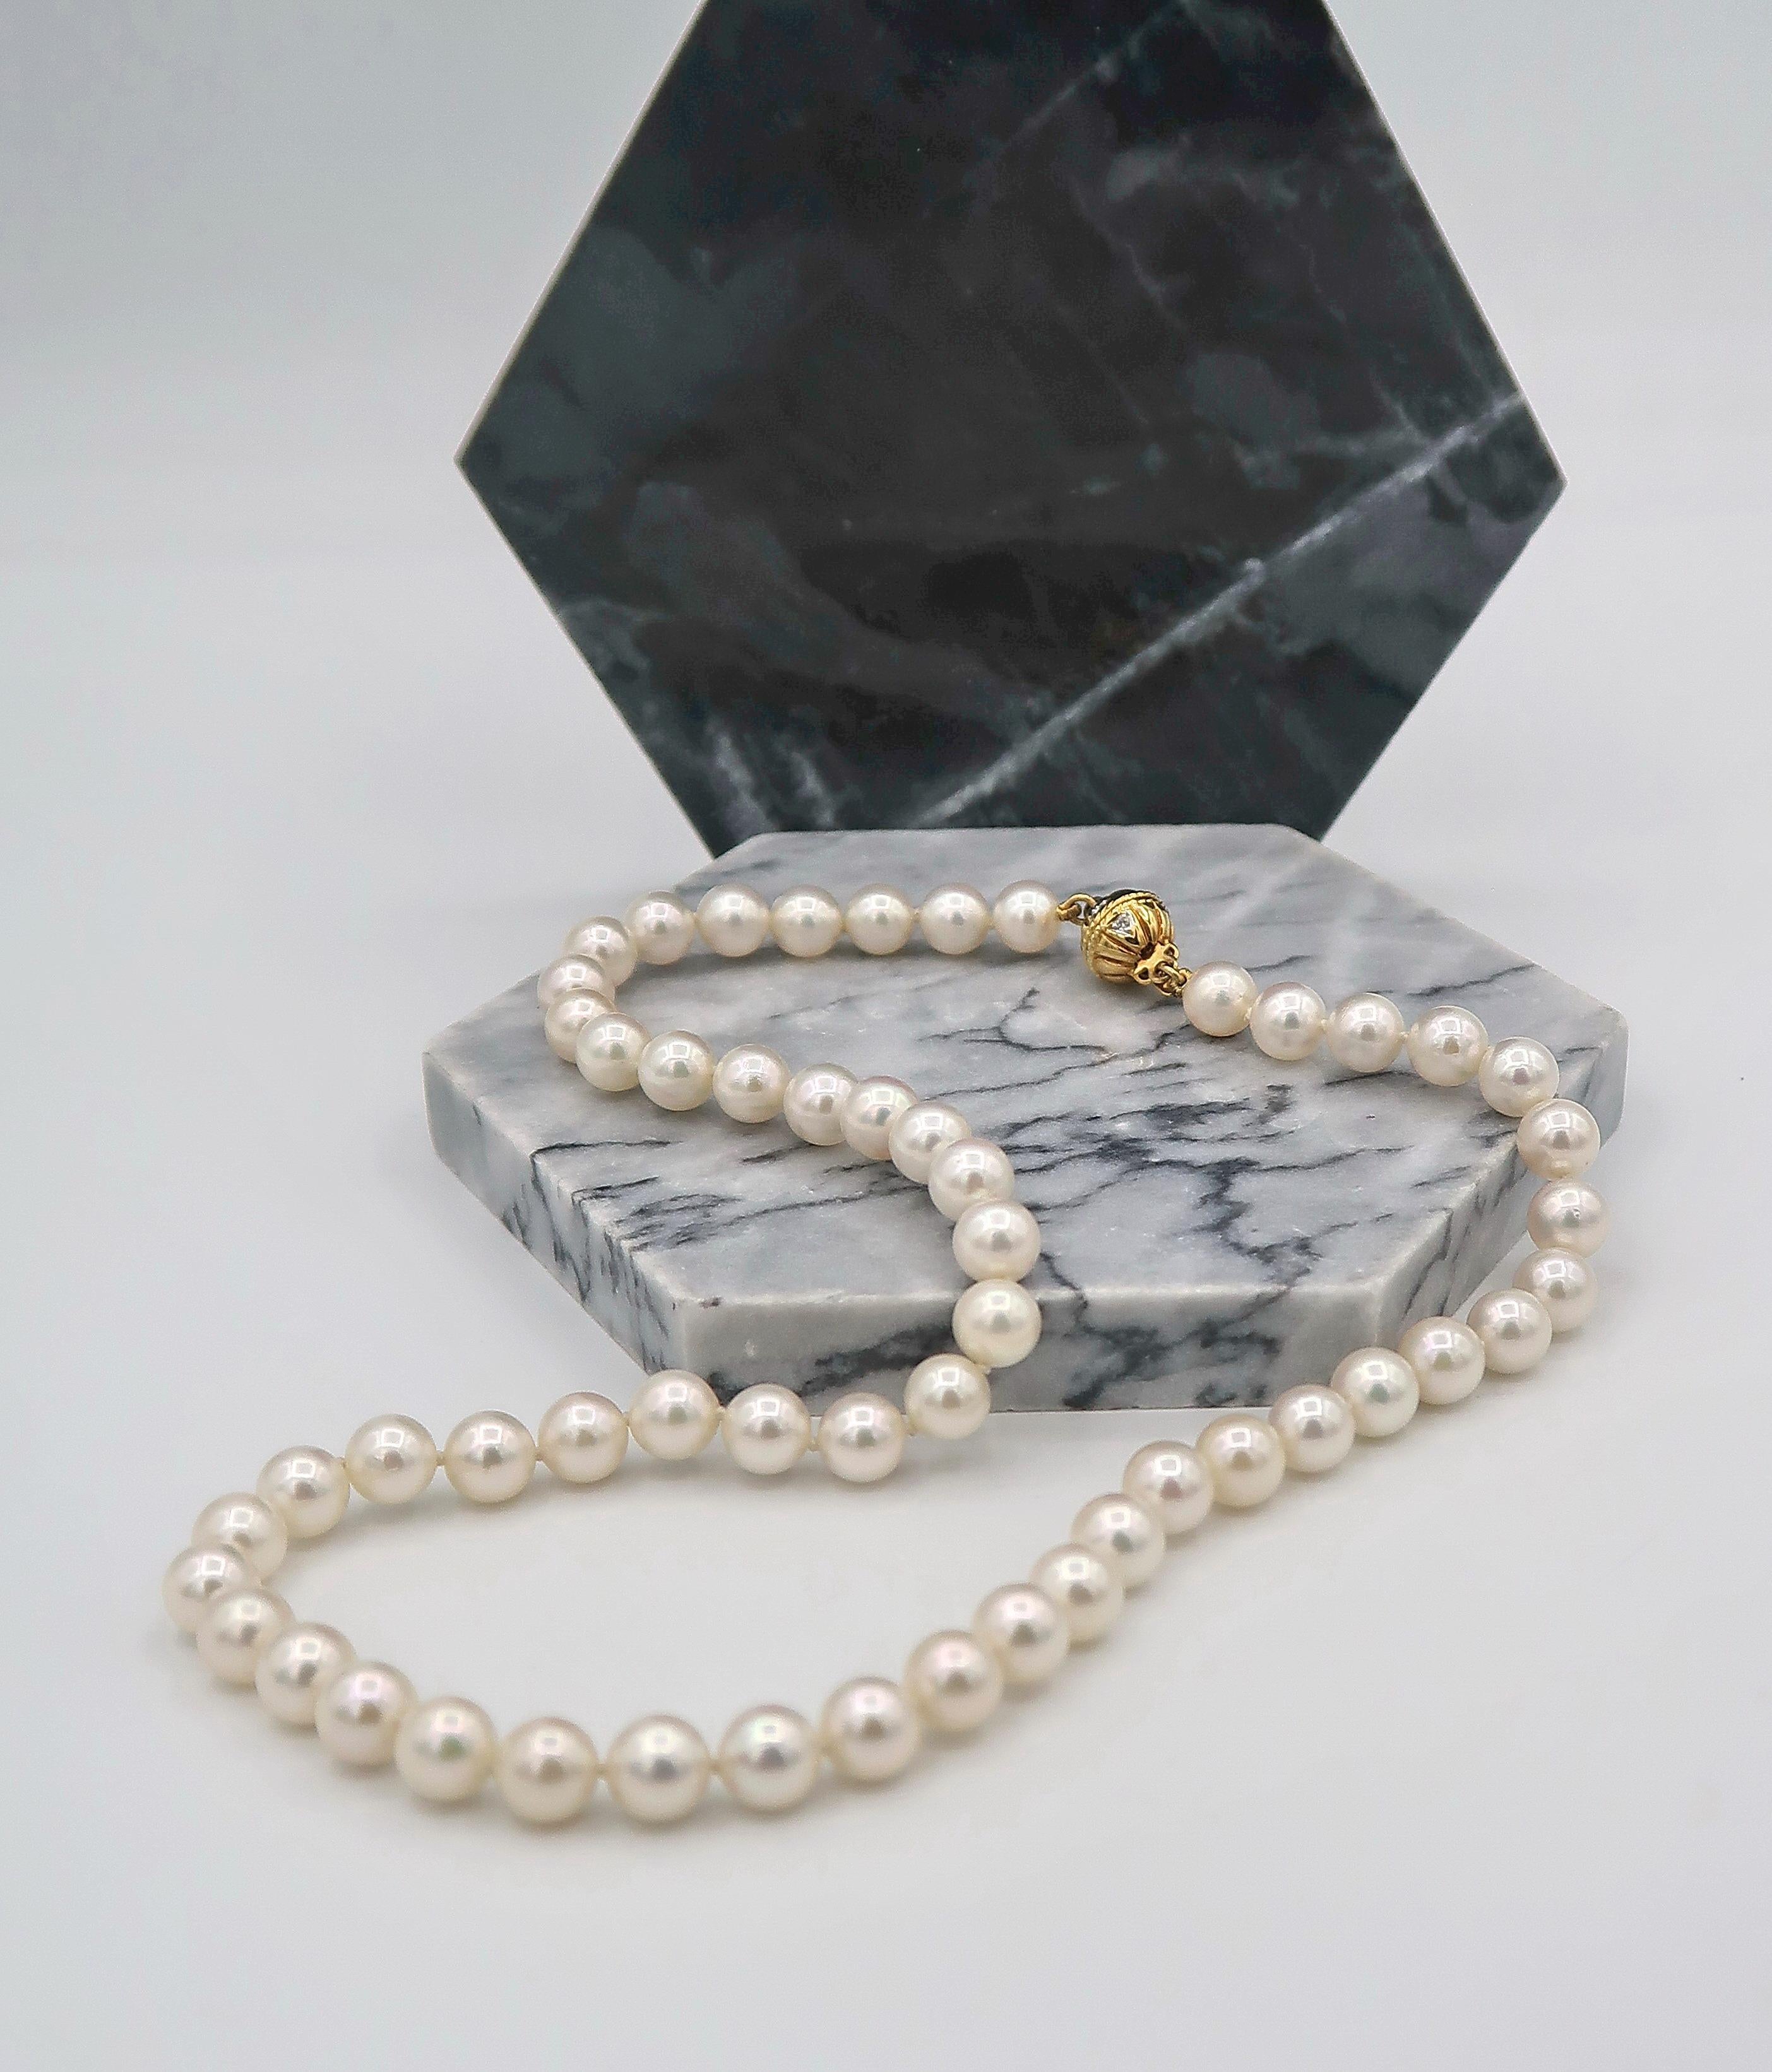 15-Inch Japanese Cultured Akoya Pearl Necklace w/ Diamond 18K Yellow Gold Clasp

Pearl: Japanese Cultured Akoya Pearl, approx. 6.5 mm
Gold: 18K Yellow Gold, 2.8 g
Diamond: 0.04 ct

Length: 15 inches